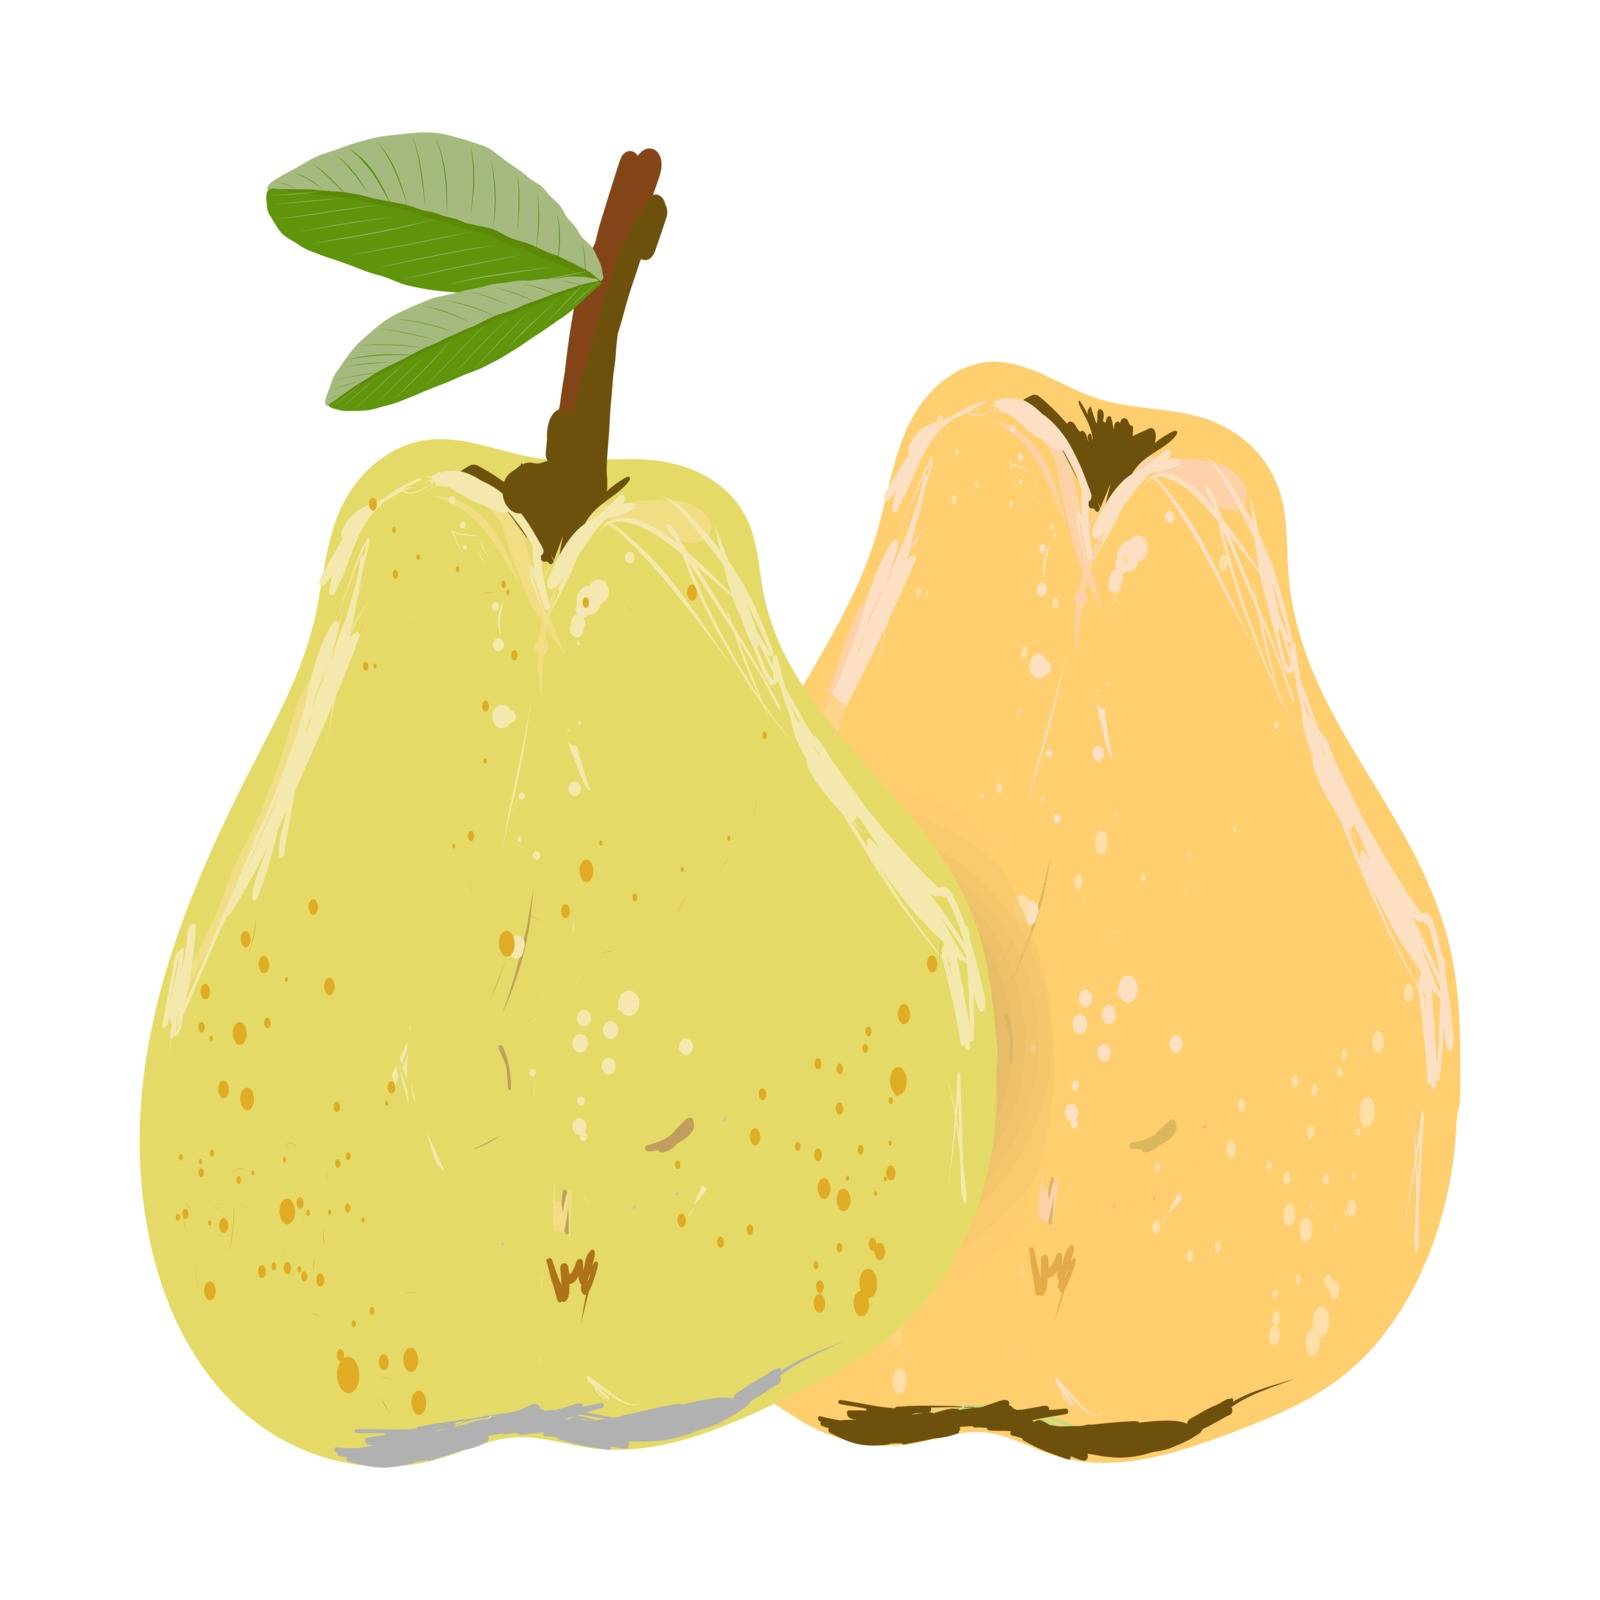 Yellow and orange whole pear isolated on white background vector illustration by Nata_Prando